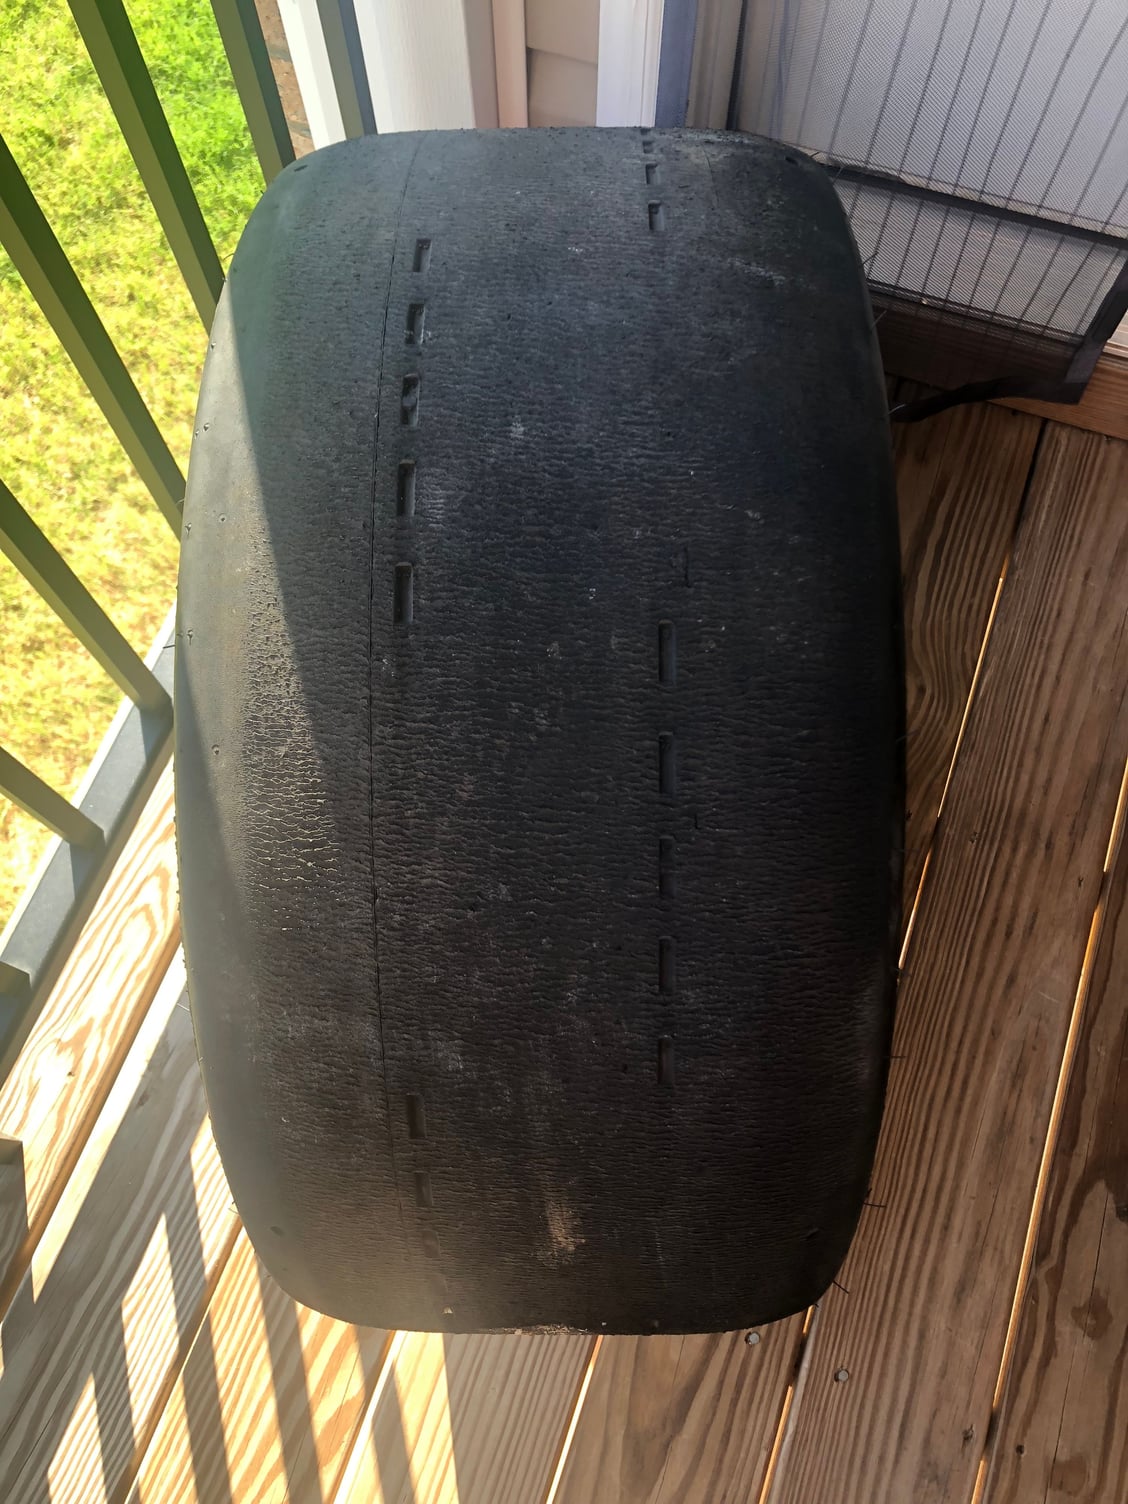 Wheels and Tires/Axles - HOOSIER RADIALS FOR SALE PRICE DROP!!$400 - Used - 2009 to 2018 Mercedes-Benz C63 AMG - Greensboro, NC 27284, United States